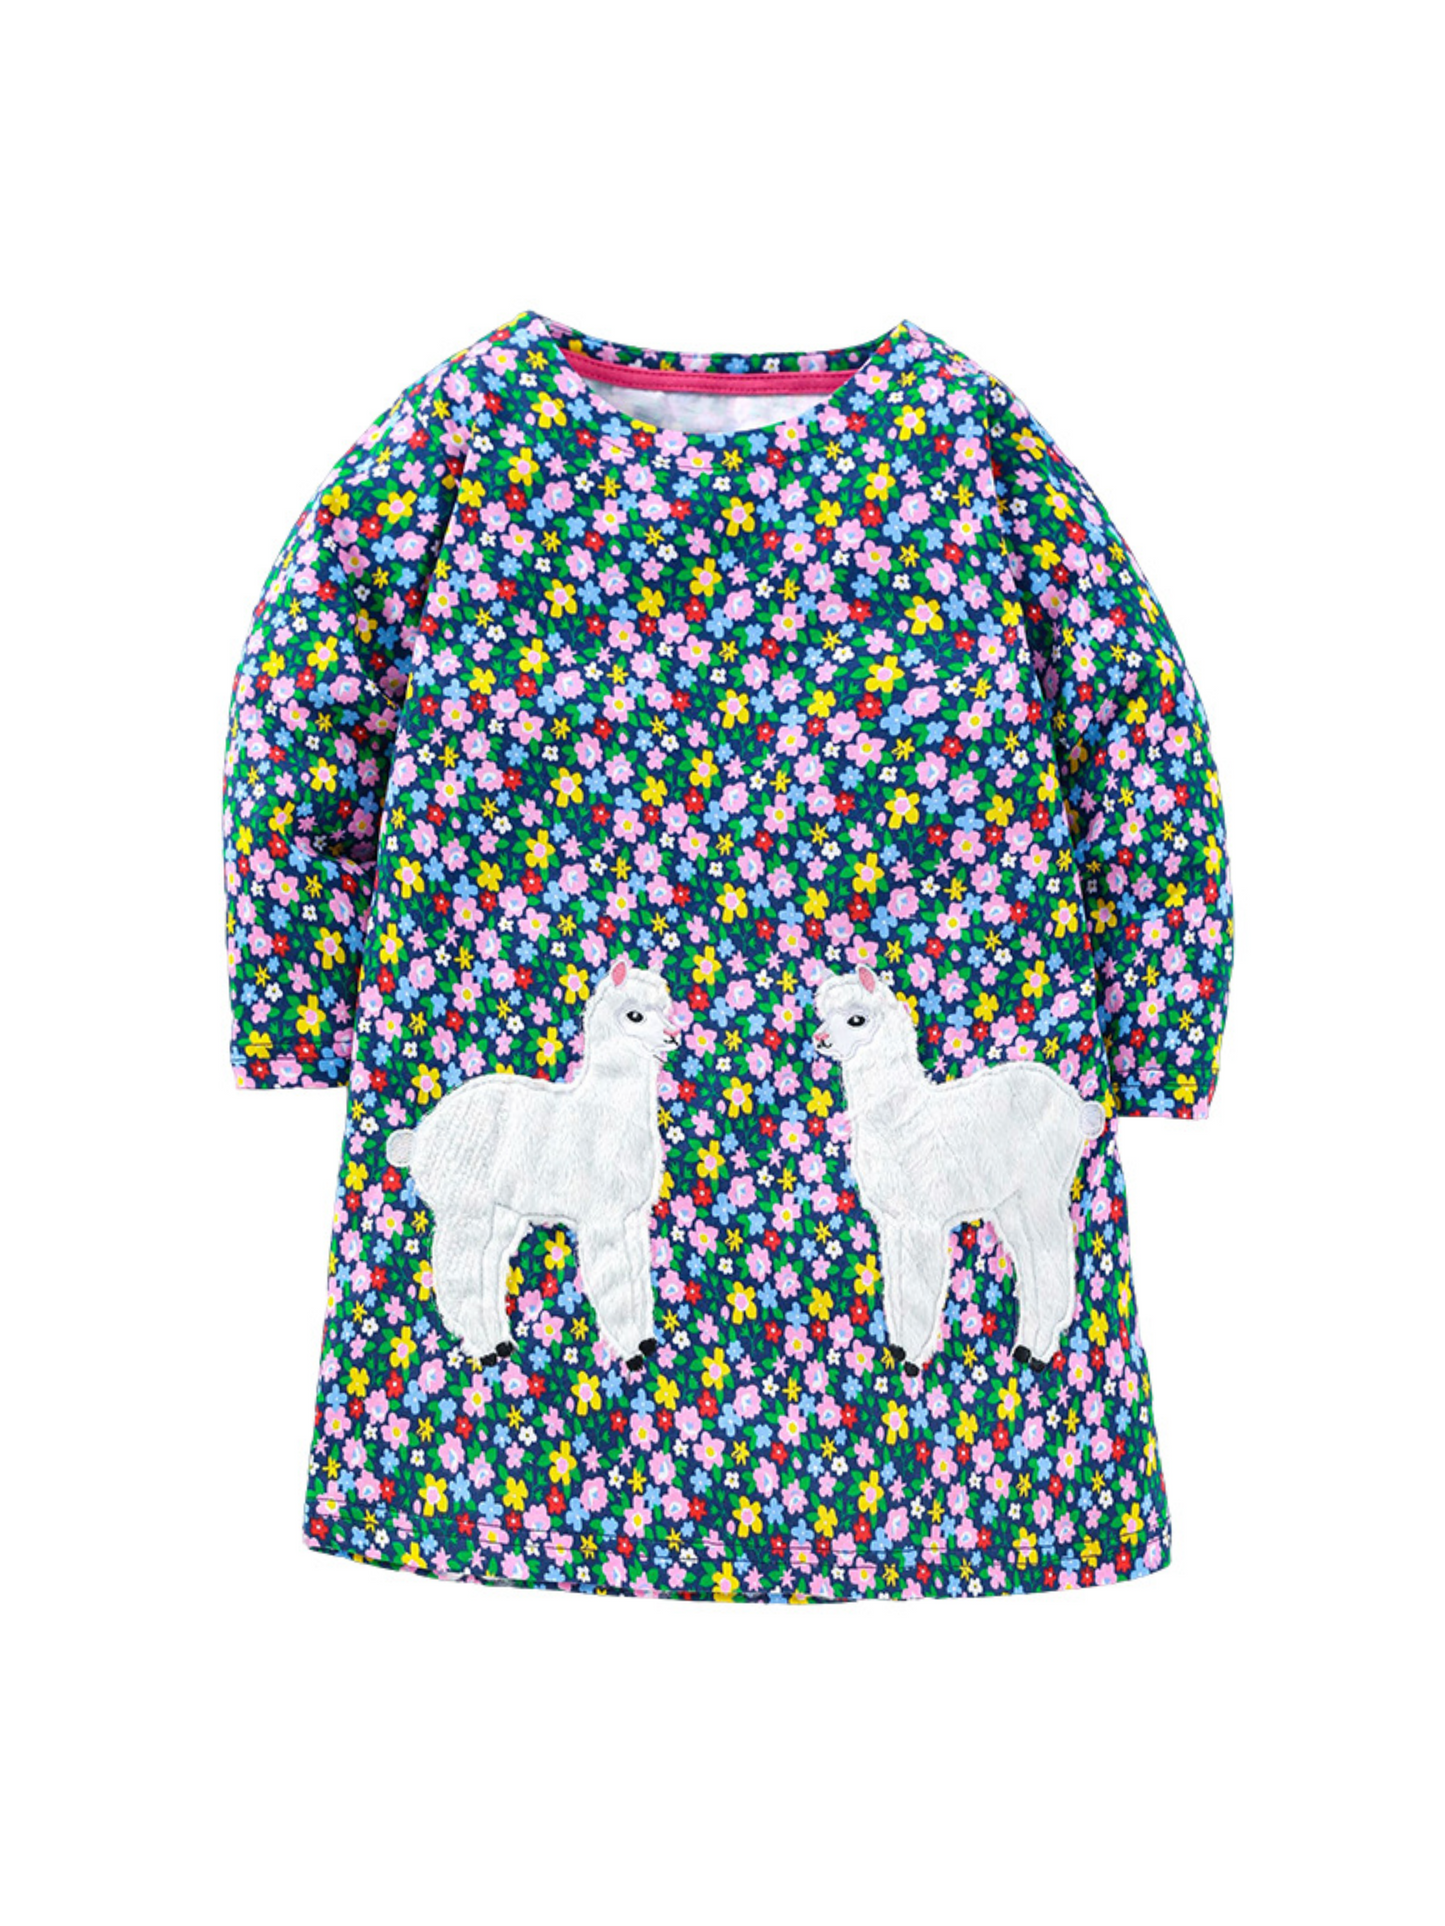 Llama flower cotton girls dress (Low in stock / size 2,6&7 yrs old)